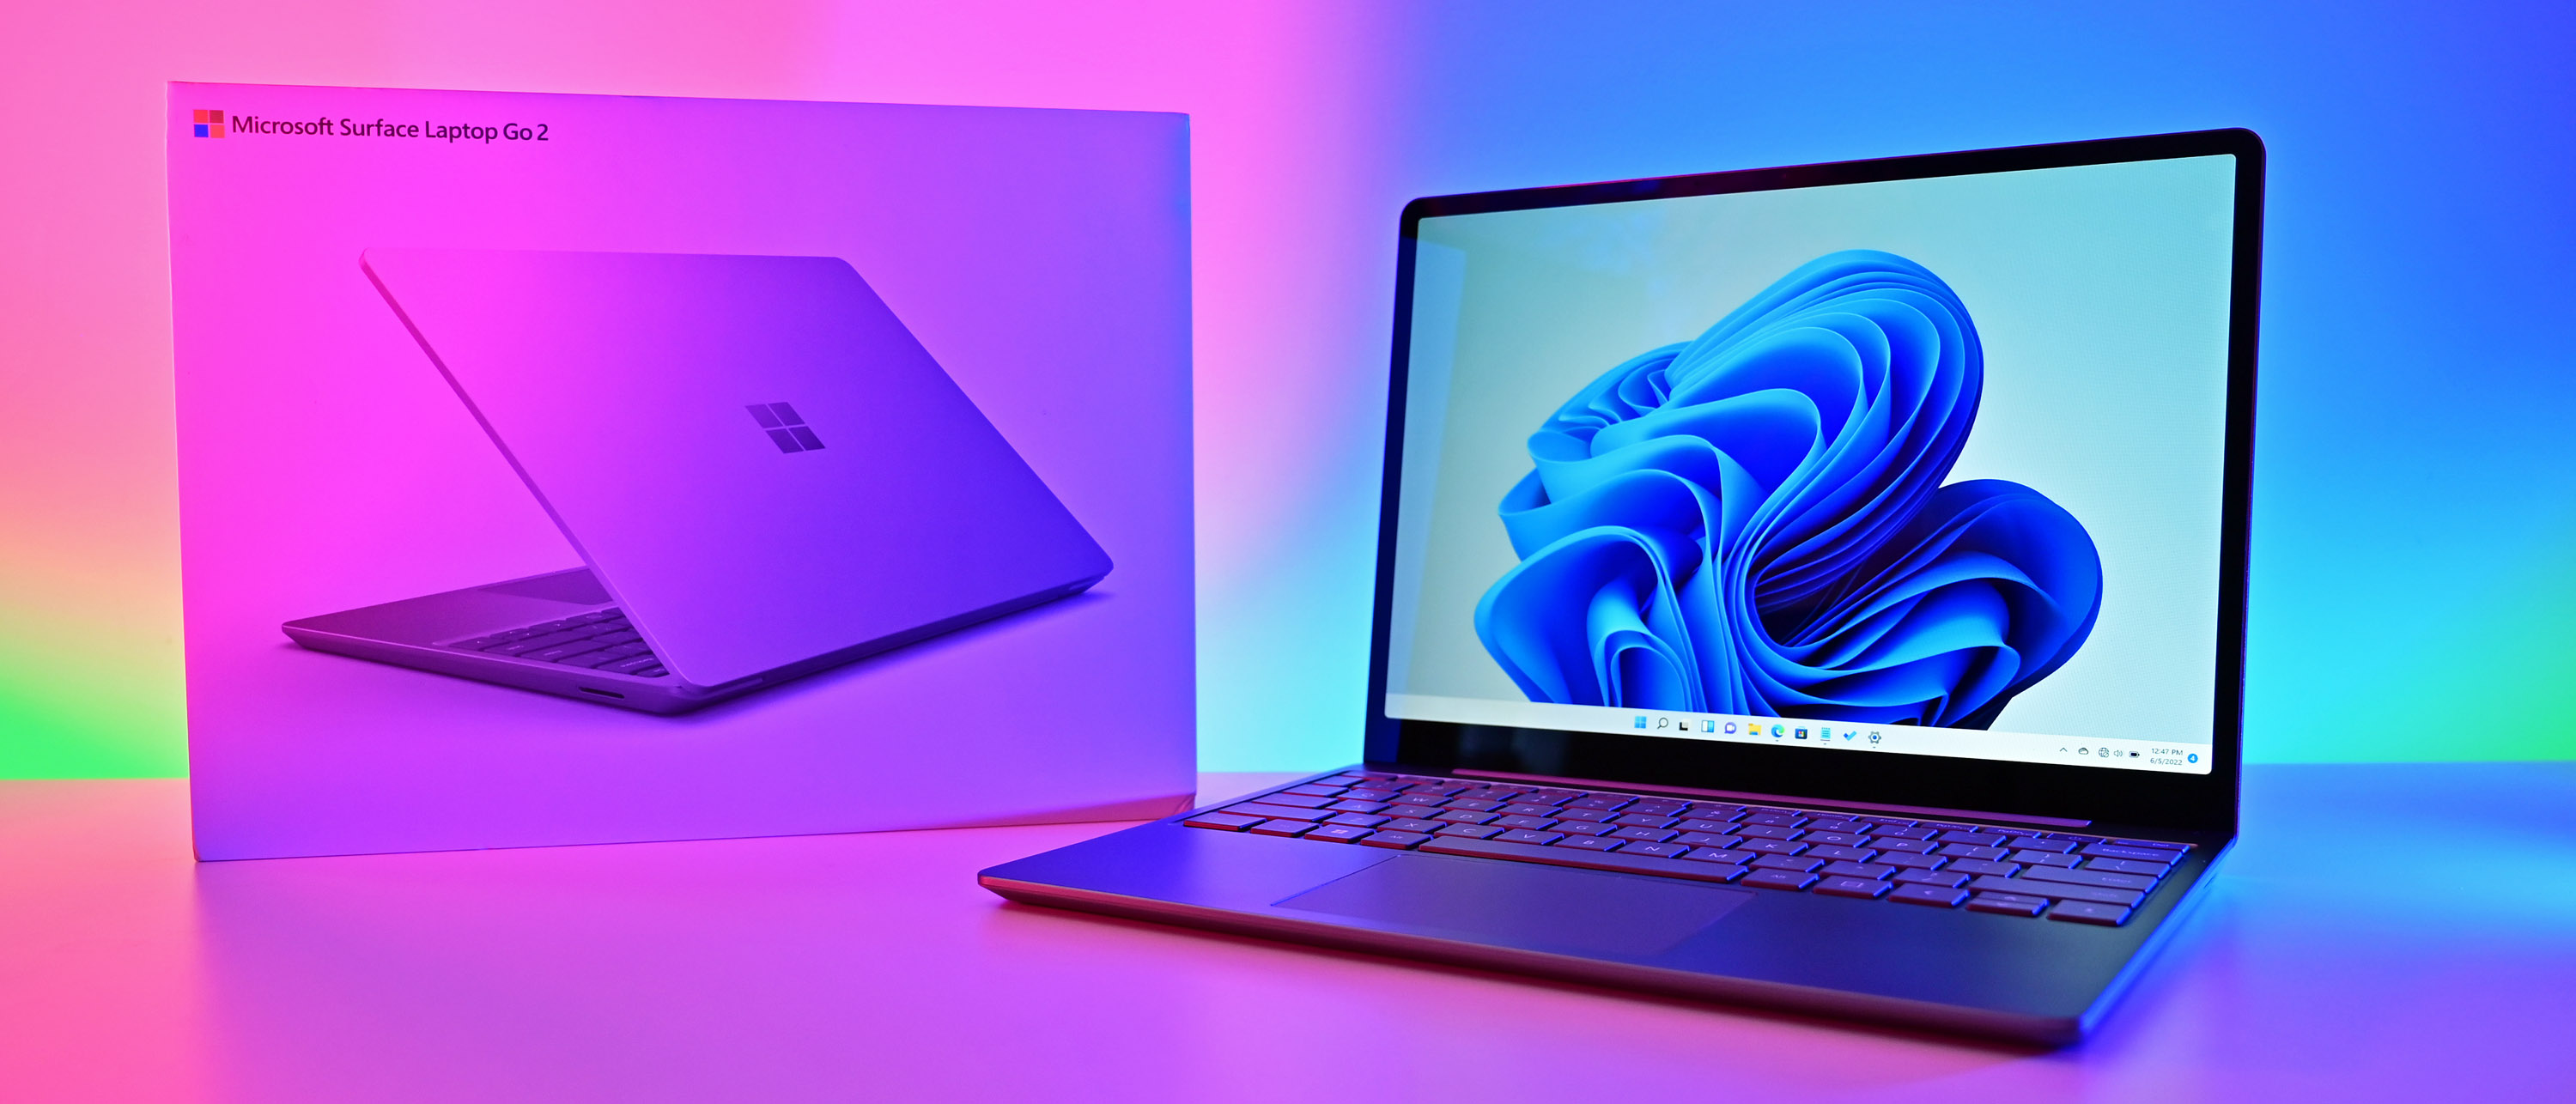 Surface Laptop Go 2 review: Faster, longer battery life, and now 